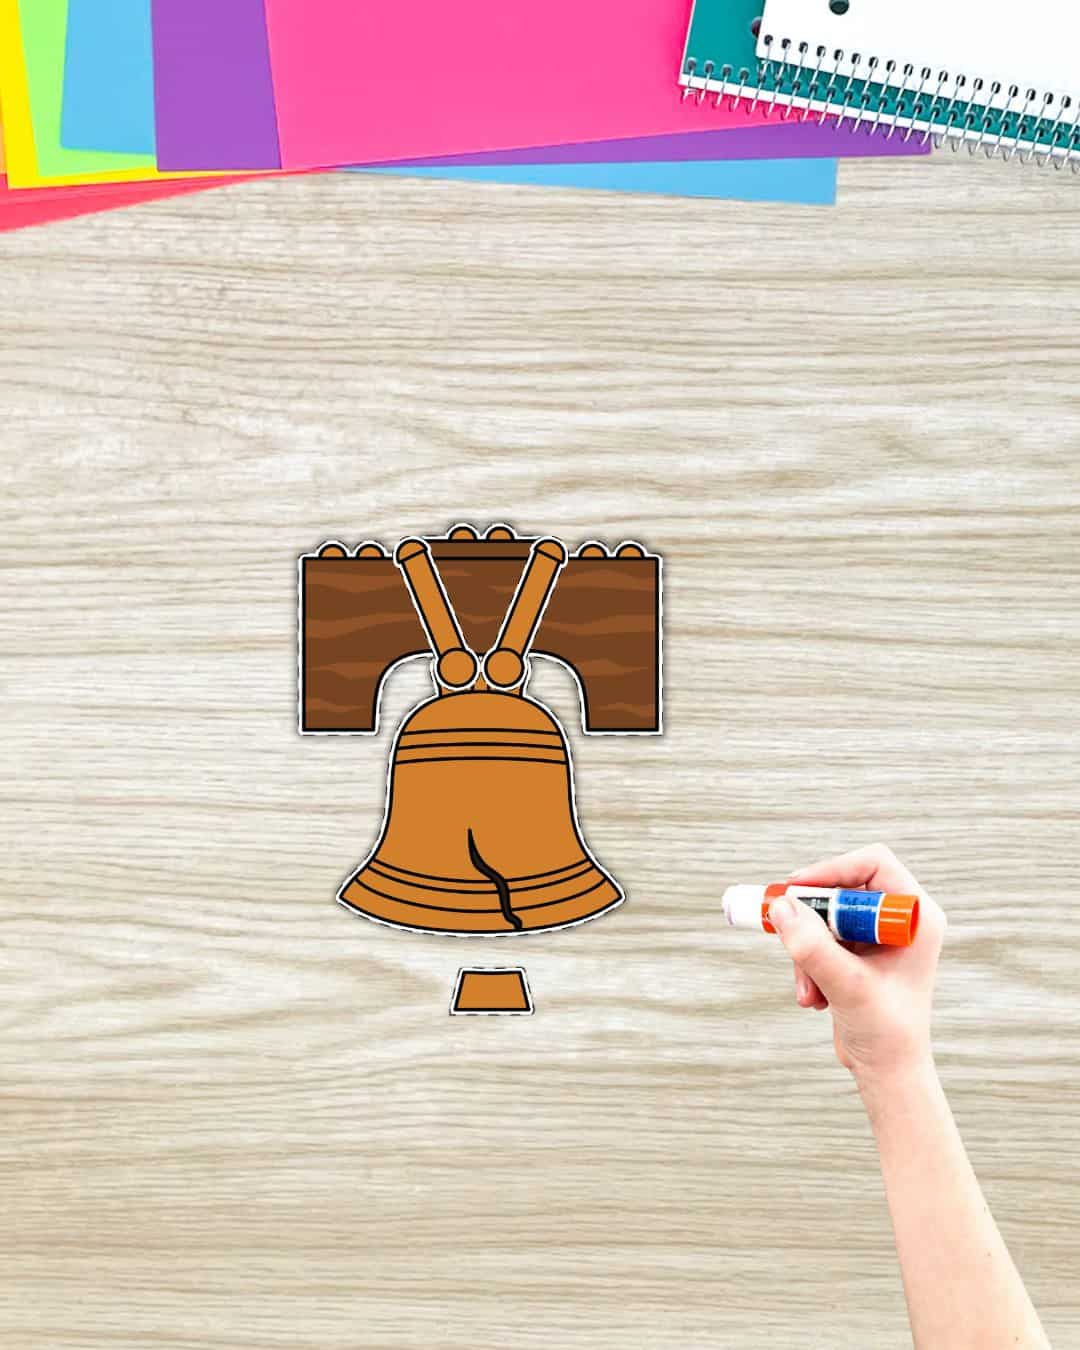 A Liberty Bell cut and paste craft being made with a hand holding a glue stick